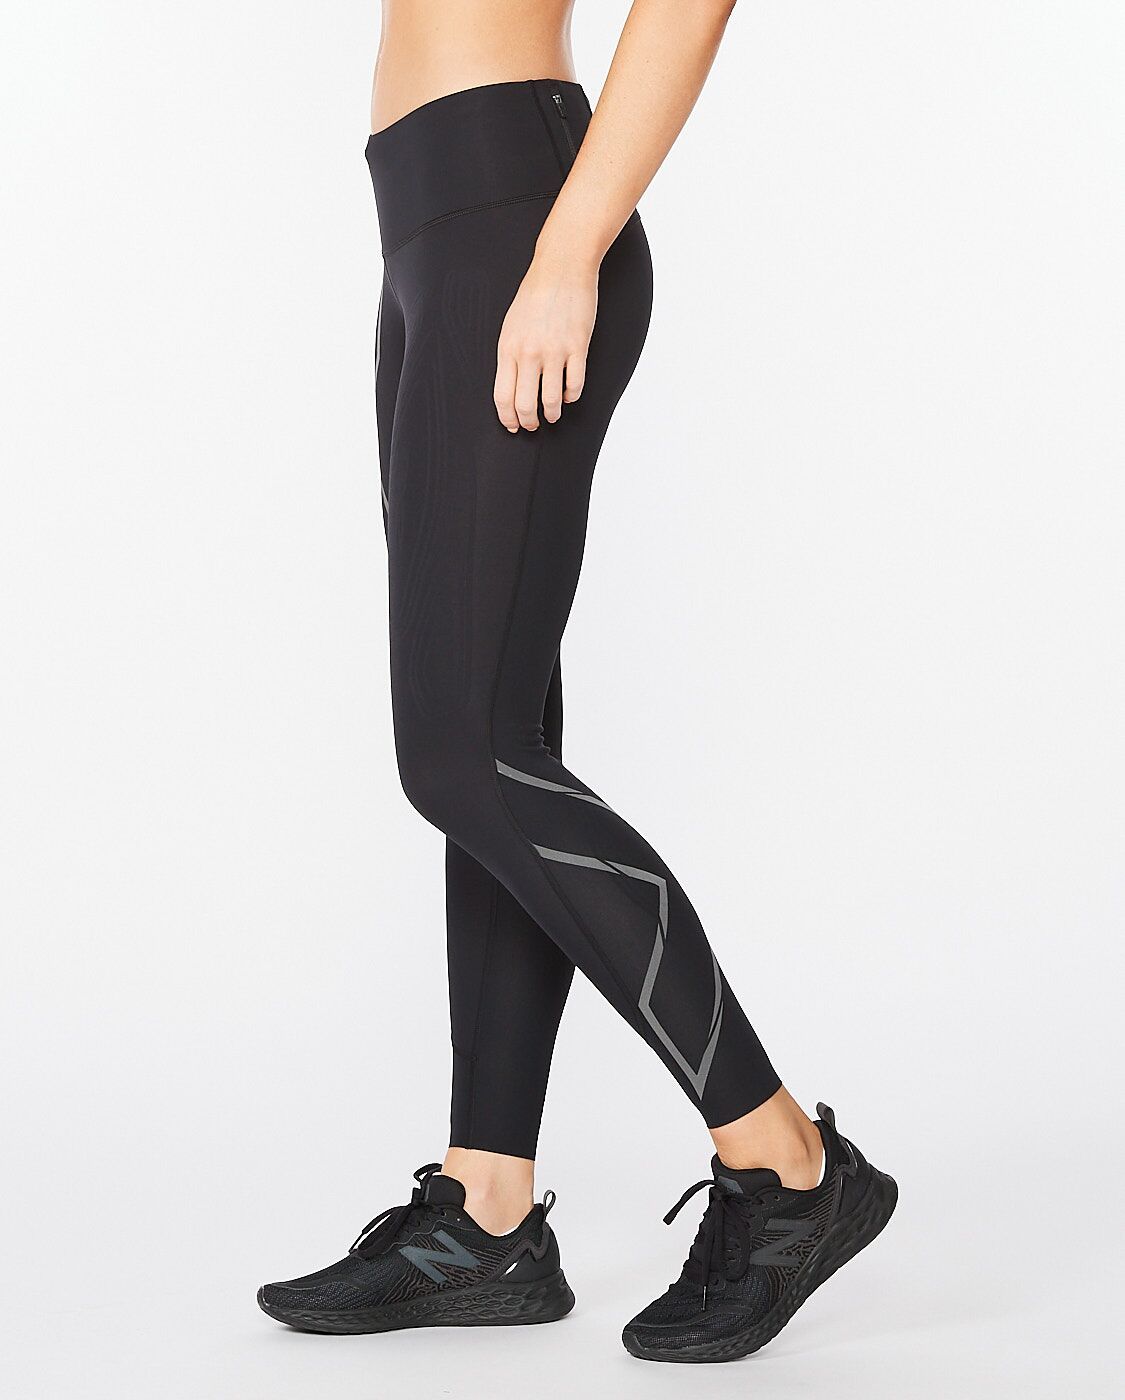 2XU South Africa - Women's Light Speed Mid-Rise Compression Tights - Black/Black Reflective